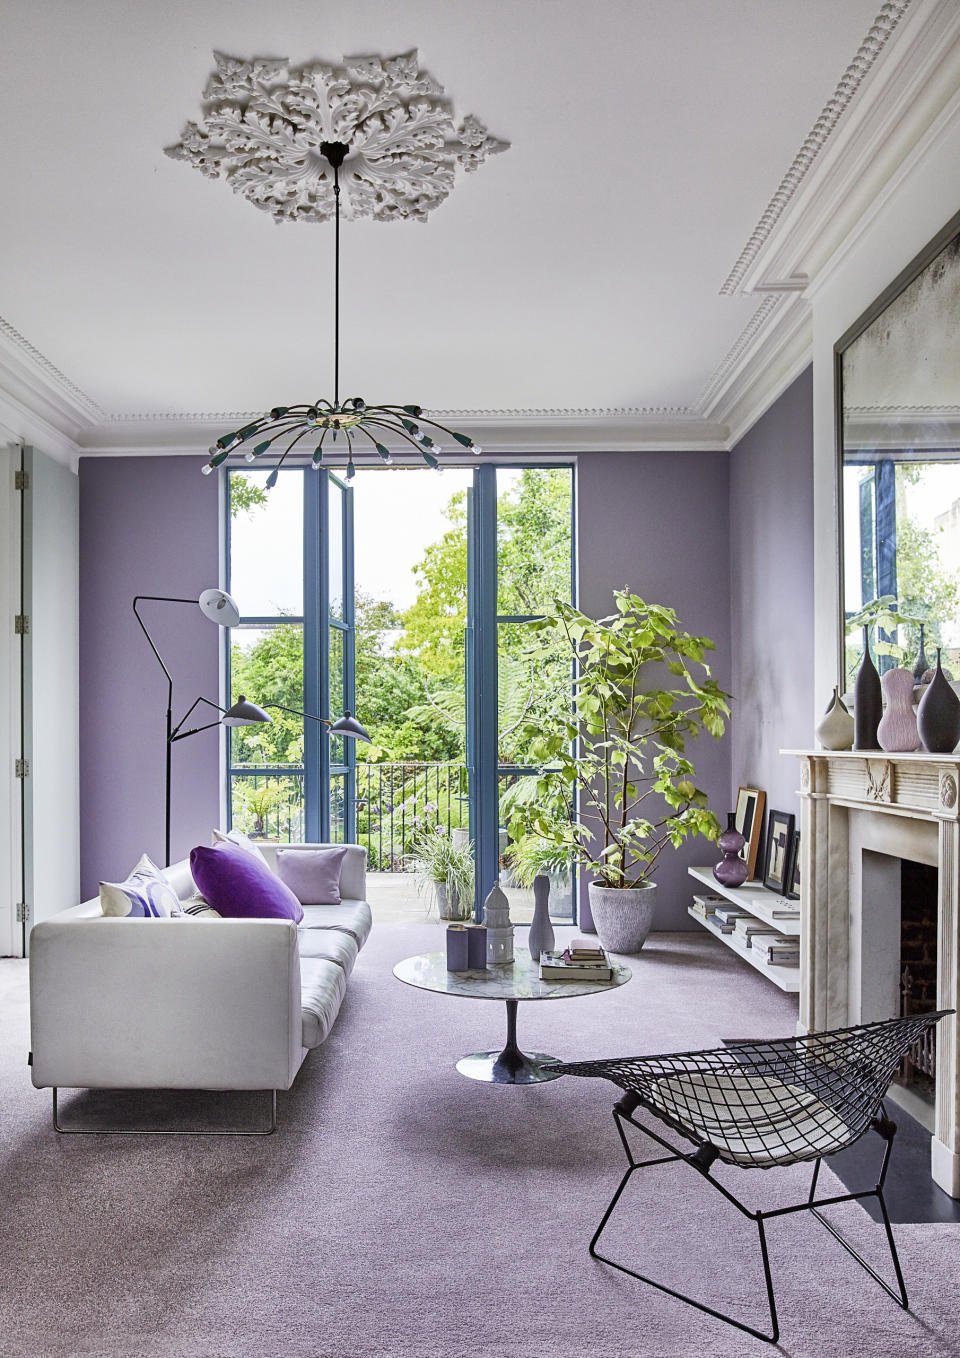 <p> Lilac is big news in the interior design sphere at the moment and we're expecting to see a surge in this pretty pastel shade throughout the year. With cool bluey undertones, lilac is an inherently cool color. This means it works particularly well in south-facing rooms, so the cool tones can balance out the yellow warmth of the sun to create an ambiance that's pleasing to the eye. We love the color courage in this space of taking the shade on all walls and floors. Sticking to black and white with the furniture and accessories makes for a calm and cohesive scheme, letting the lilac do the talking. This living room idea is one we'll be copying this season, and we've got our eye on French Lilac from Benjamin Moore to recreate the look. </p>